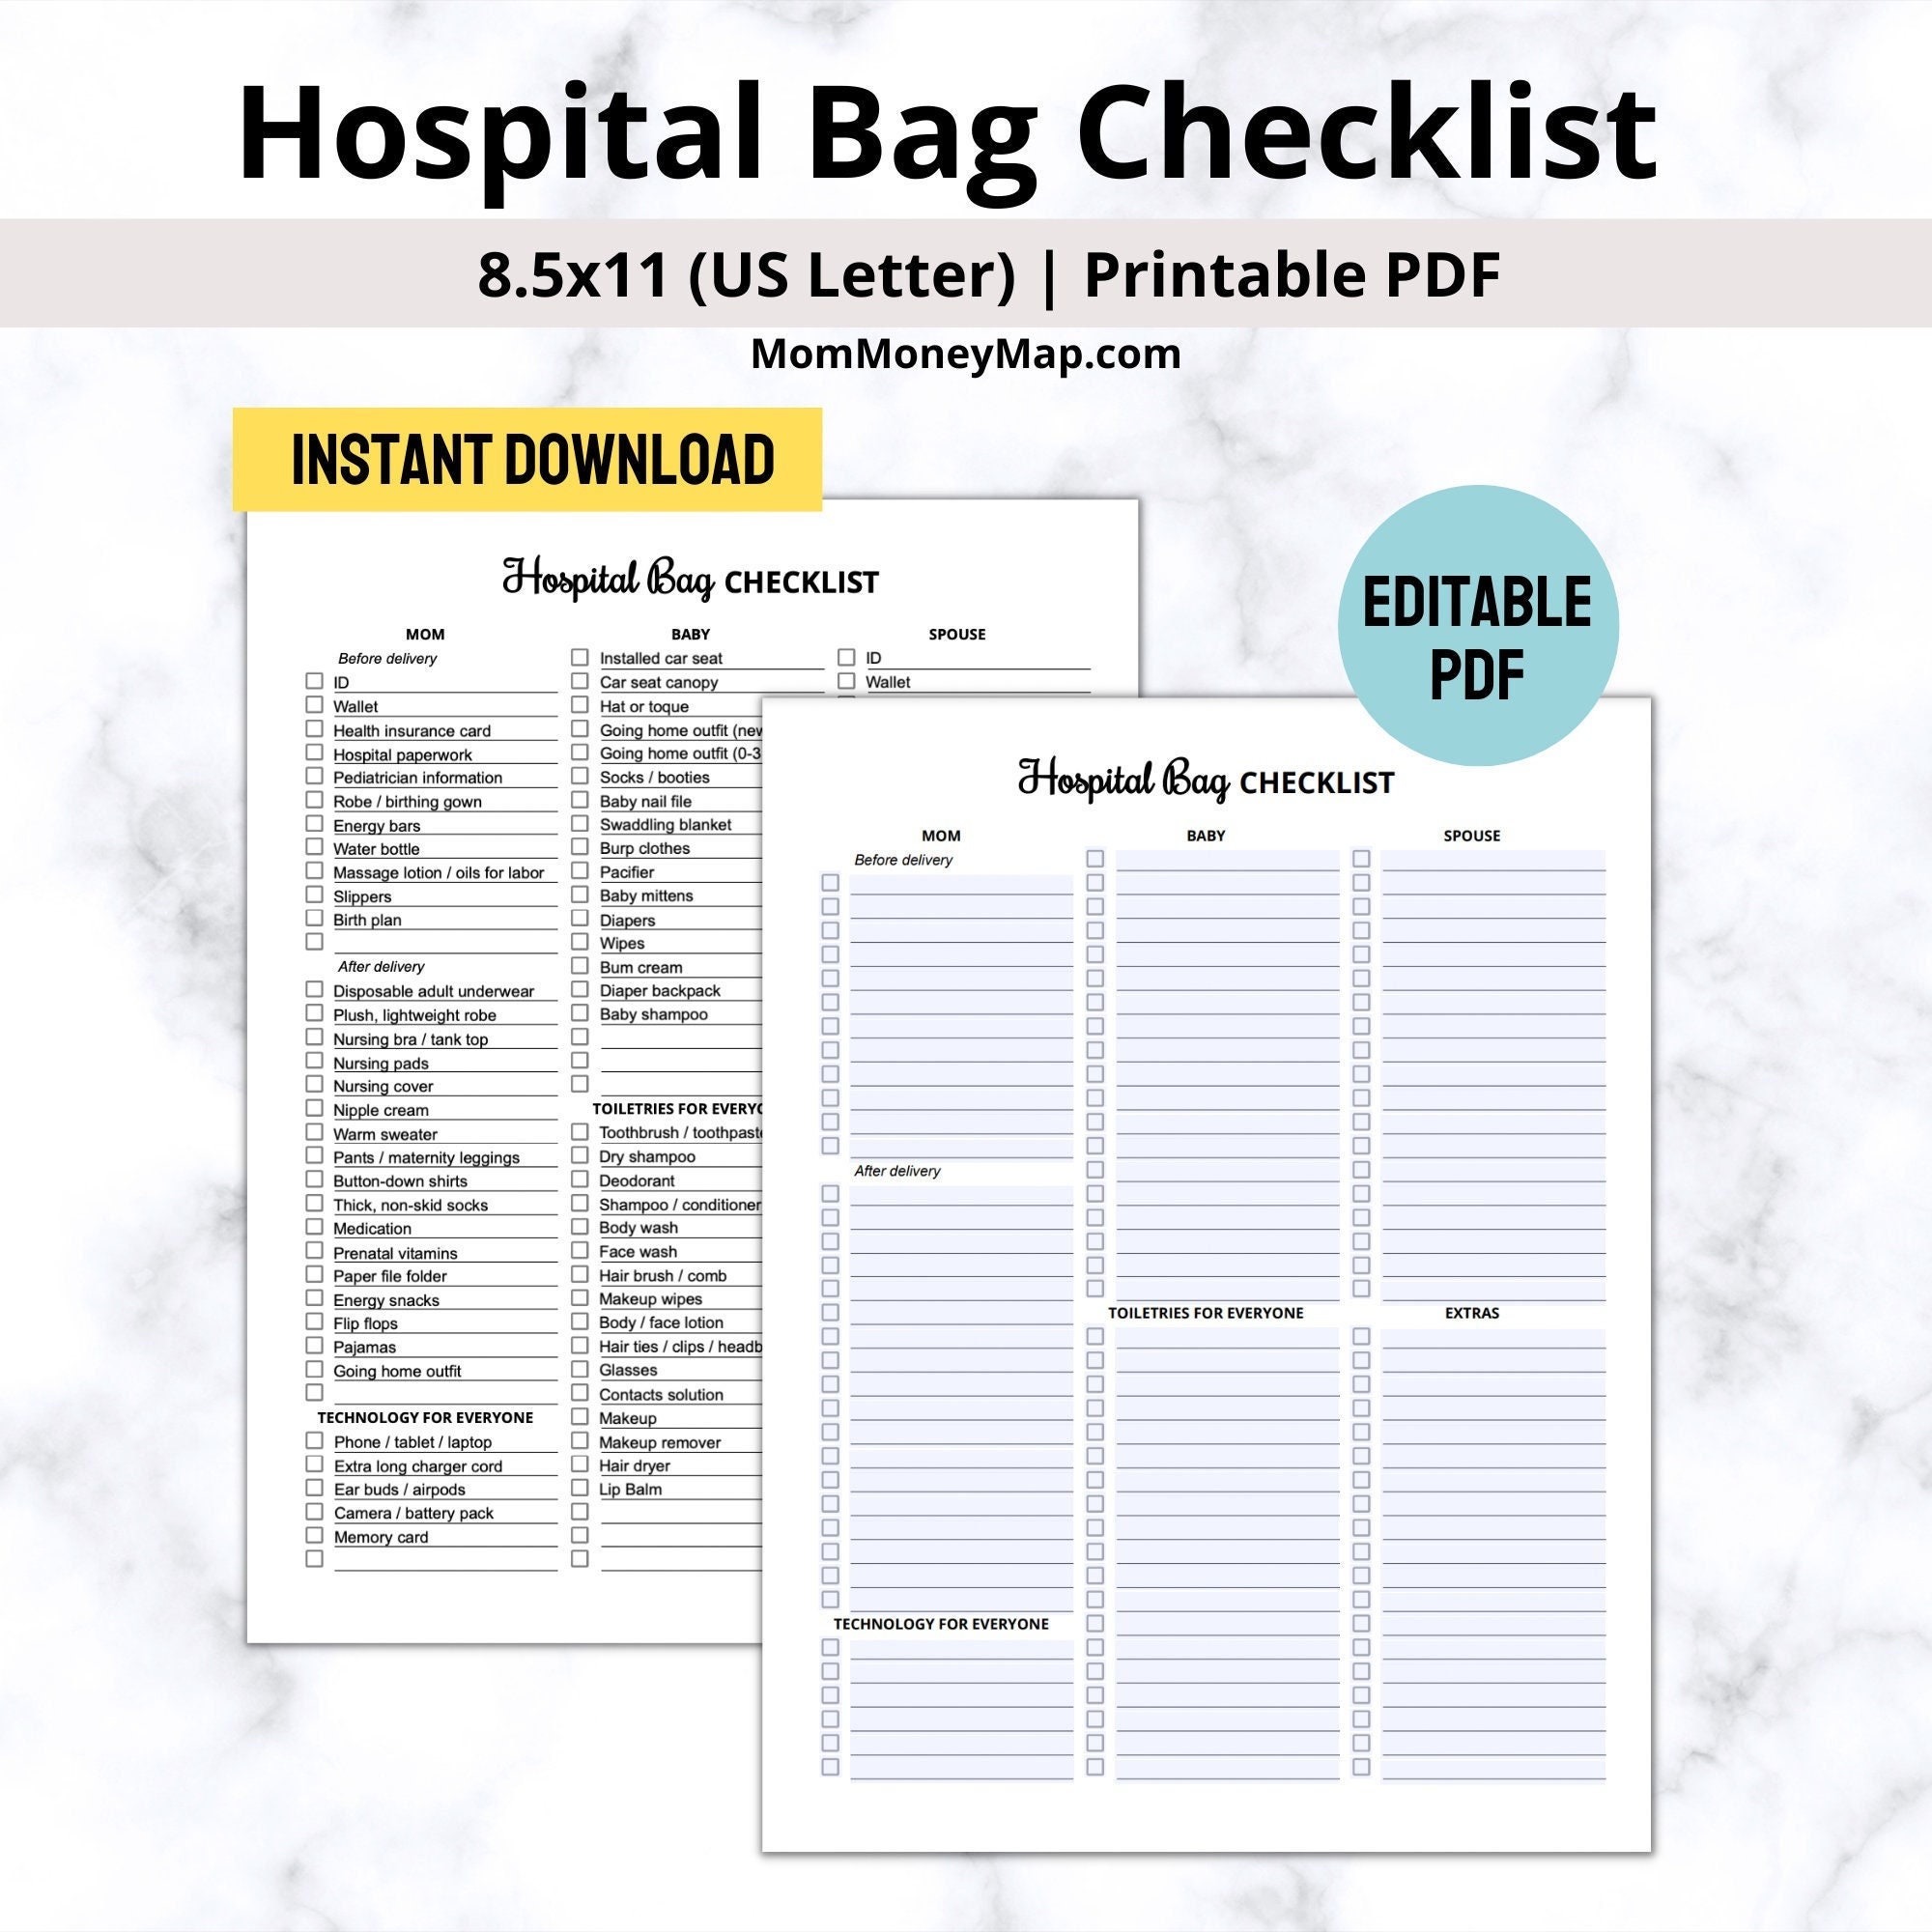 Hospital Bag Must-Have's Checklist for Mom and Baby - Fantabulosity